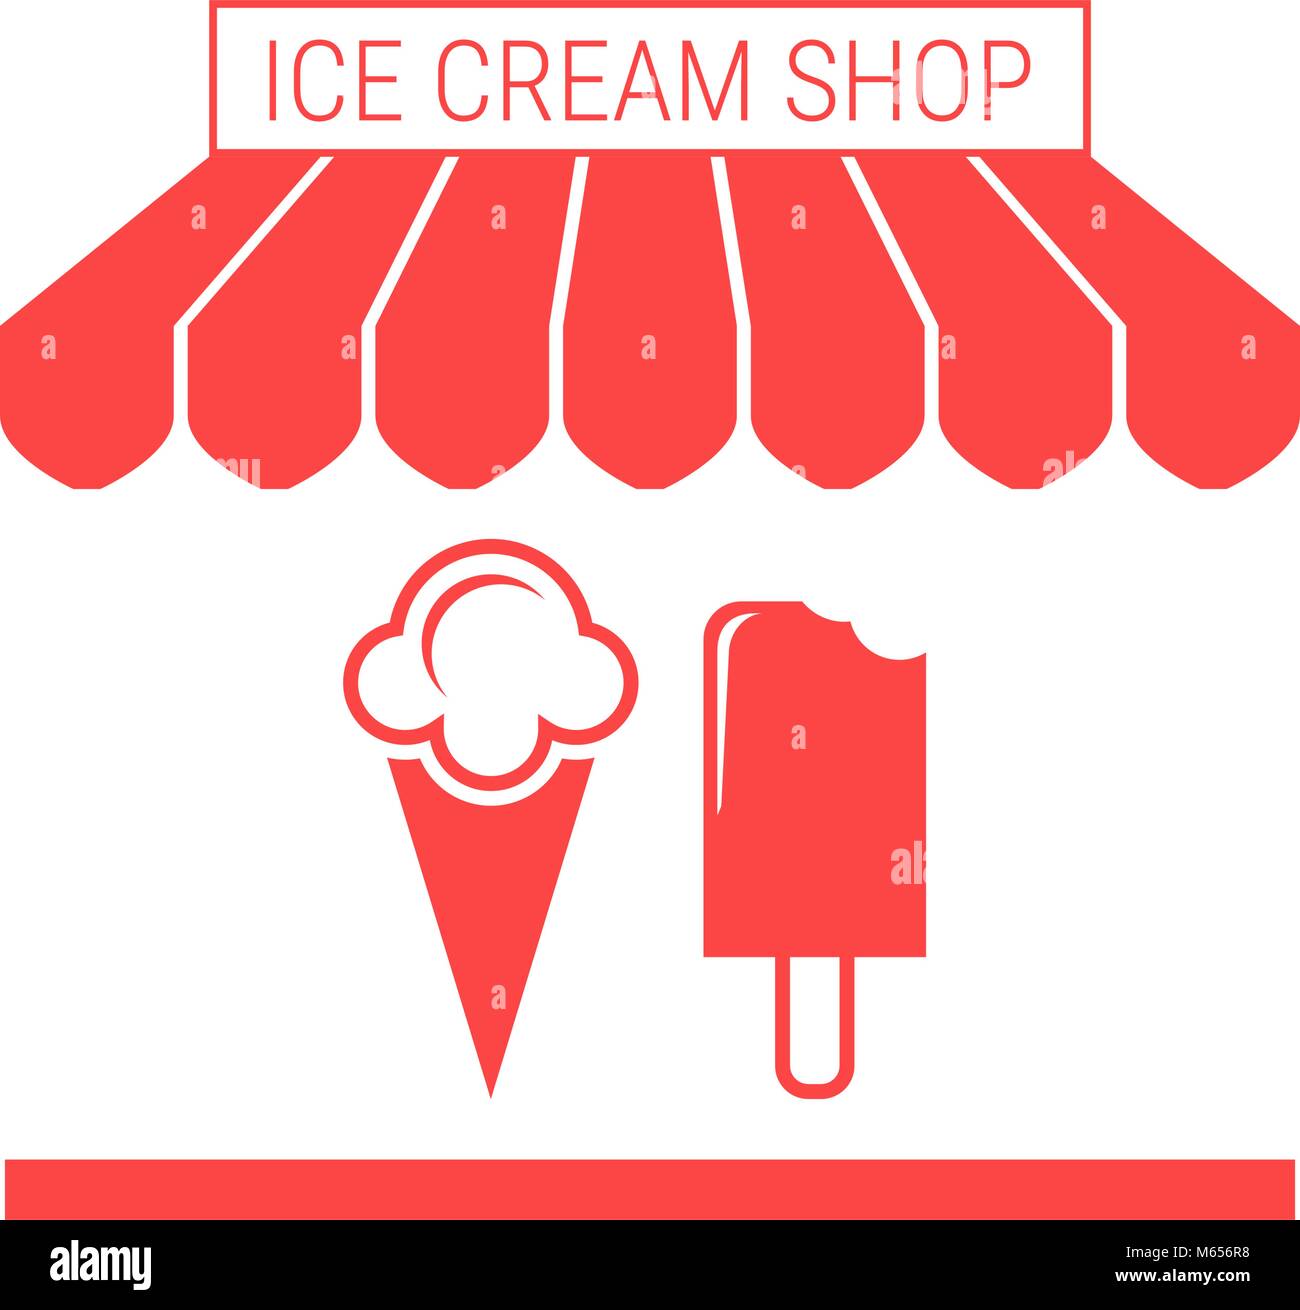 Ice Cream Shop, Frozen Yogurt Single Flat Vector Icon. Striped Awning and Signboard Stock Vector